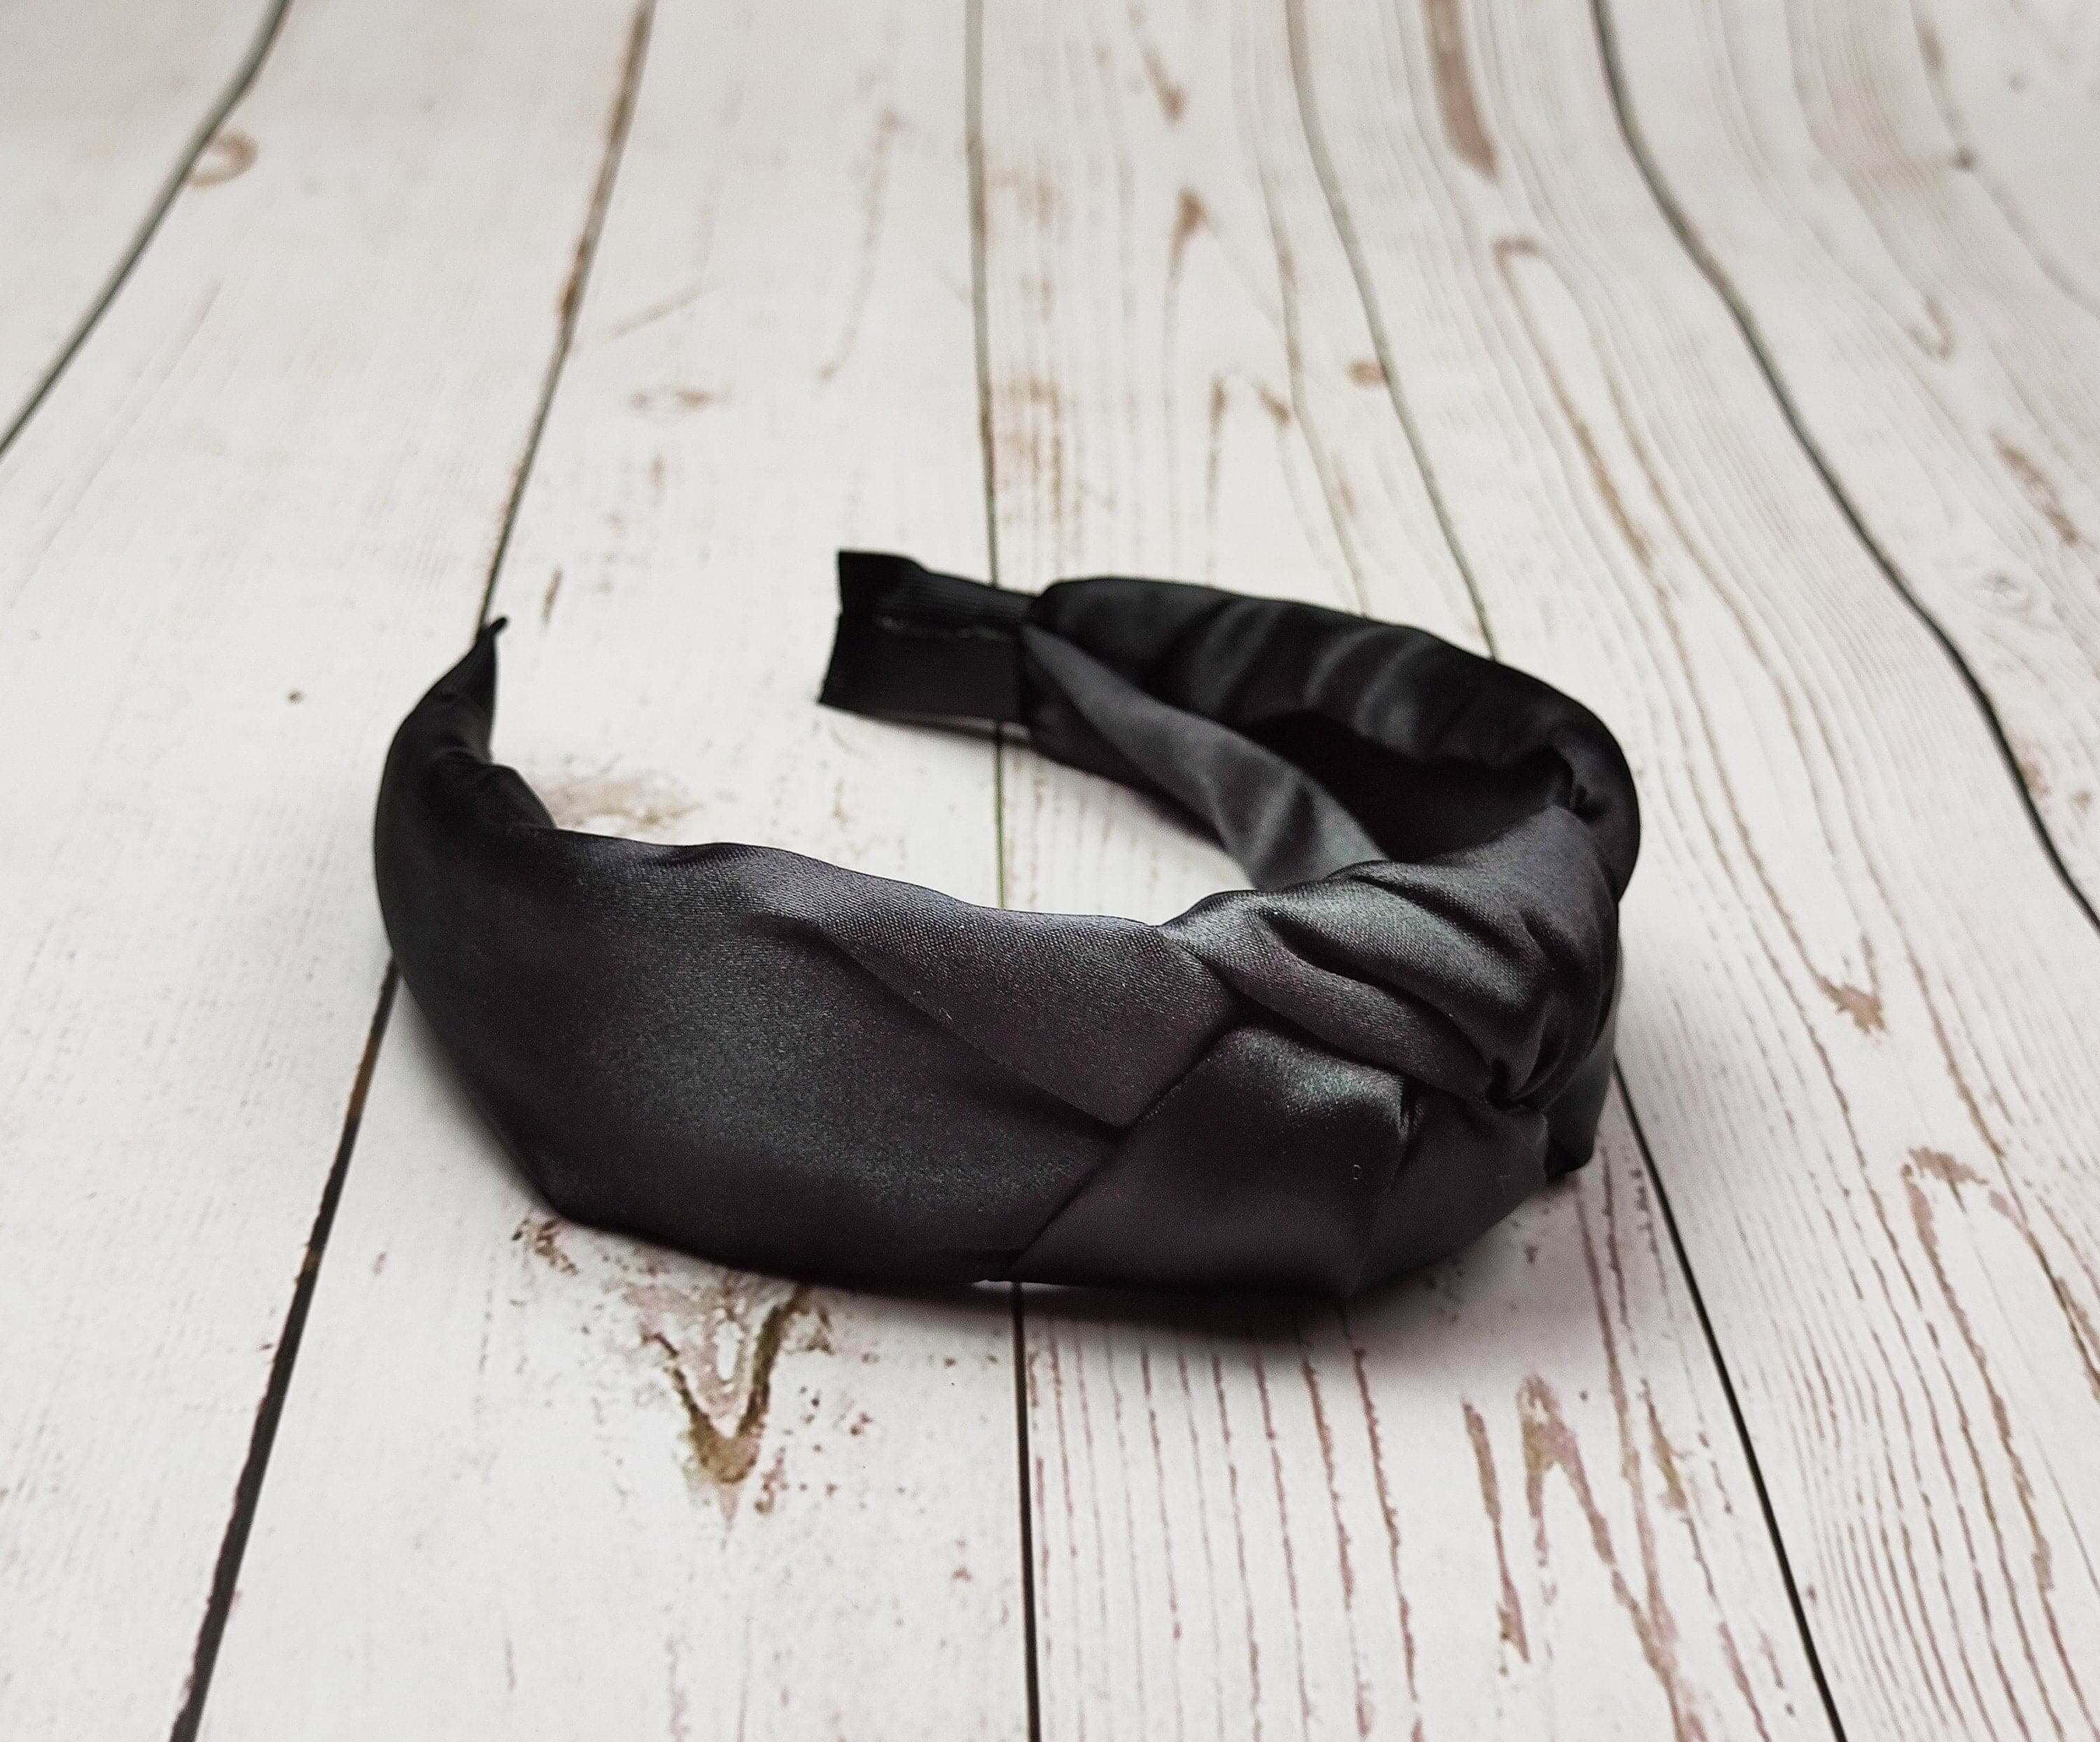 High-Quality Black Padded Satin Knotted Headband - Stylish Hair Accessory for Women available at Moyoni Design